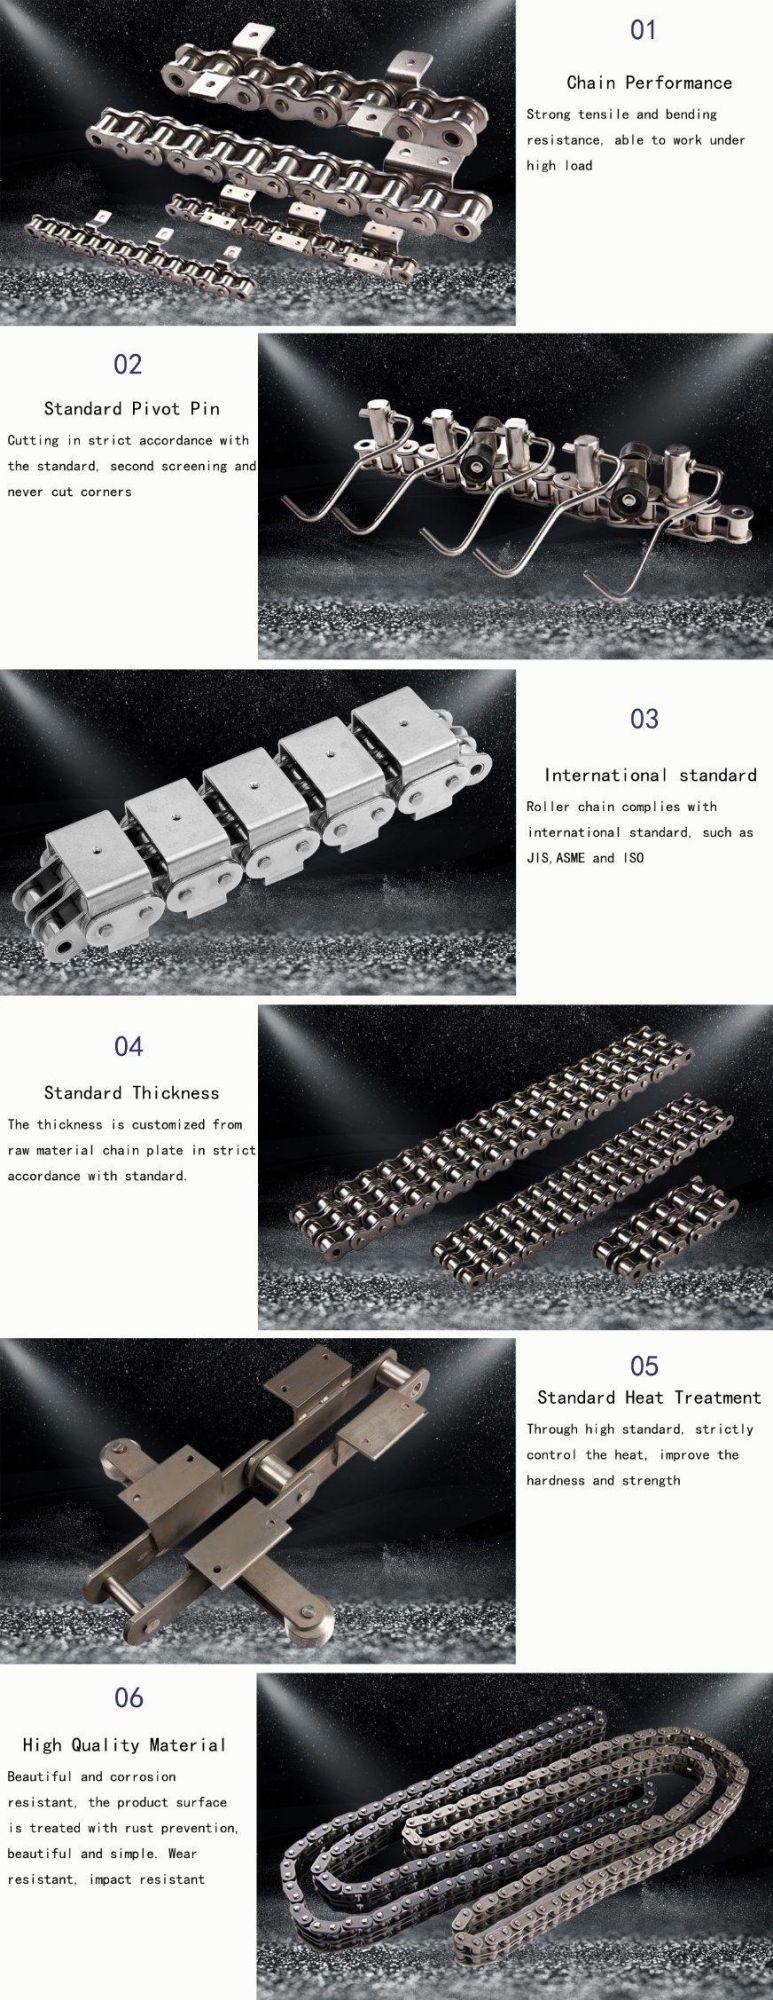 Double Large Pitch Stainless Steel Conveyor Roller Chain C216ah C224ah with Attachments A1 & A2 & K1 & K2